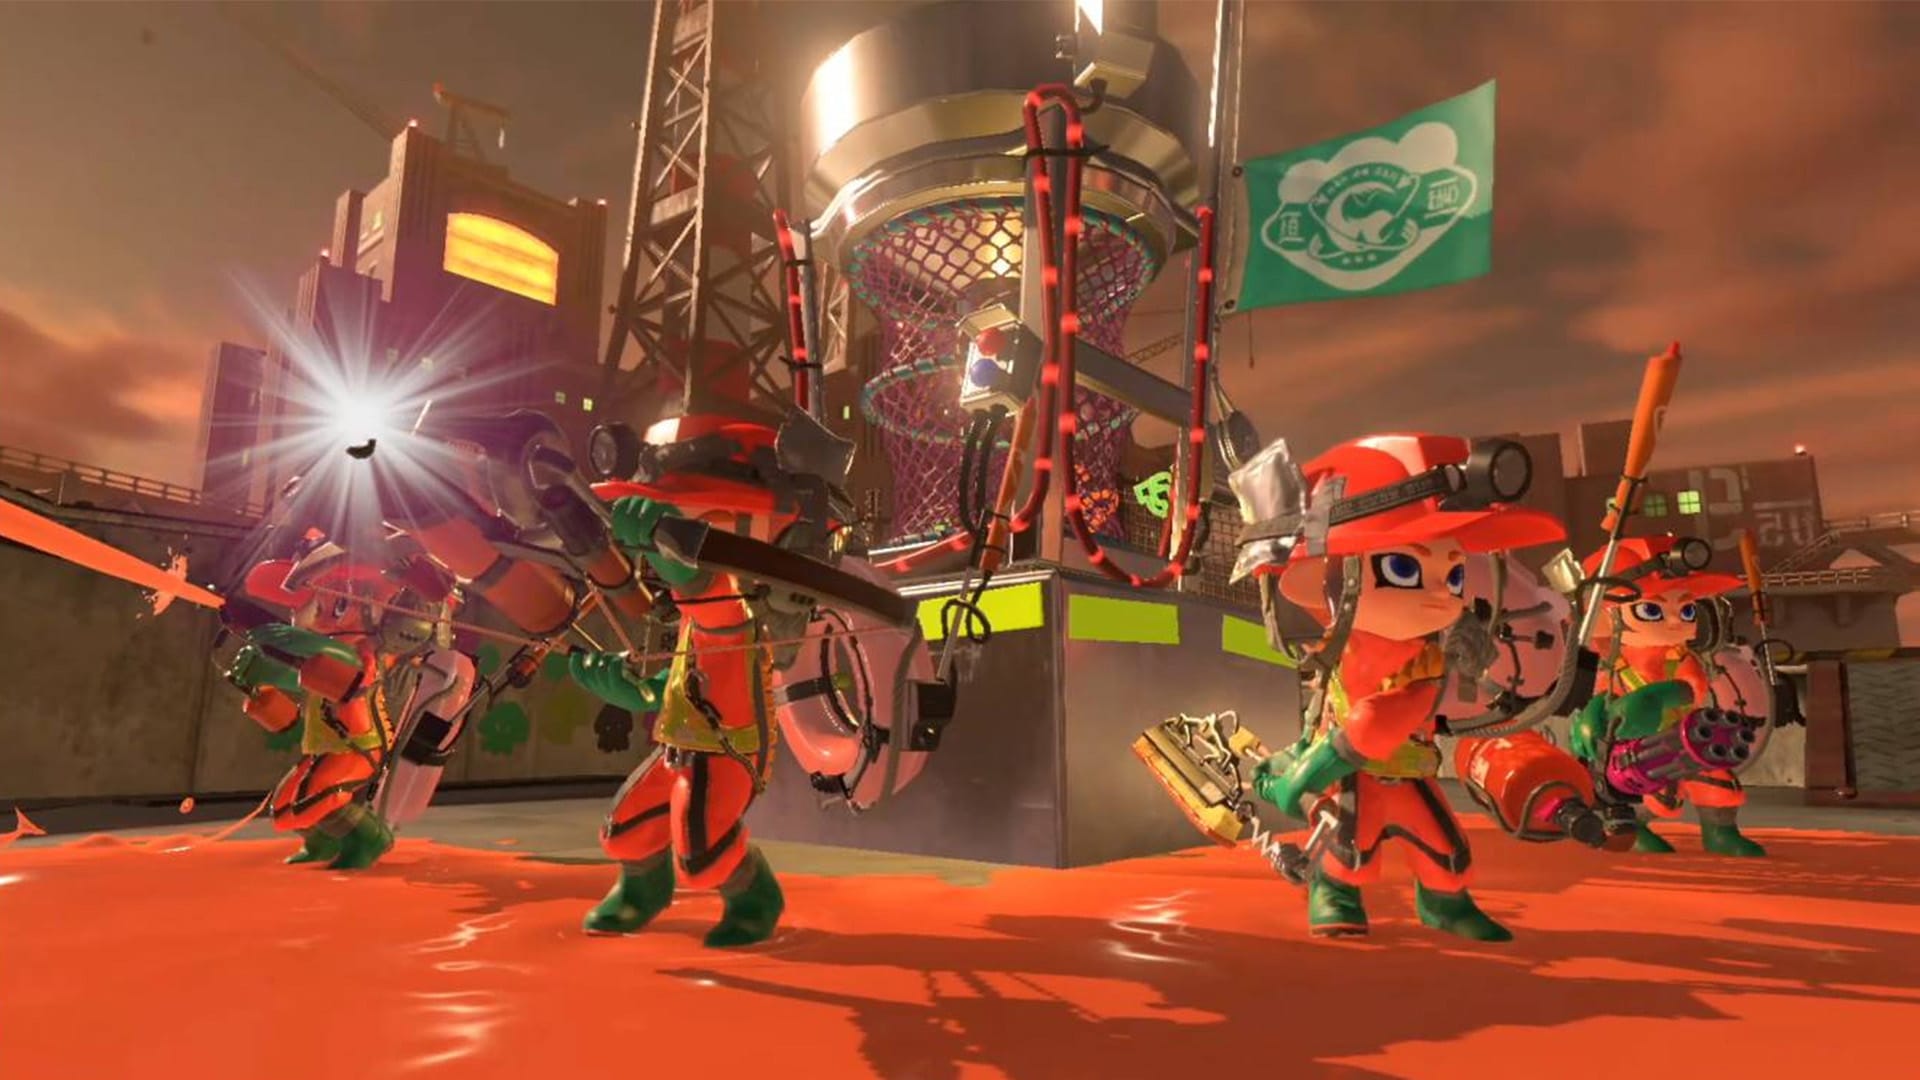 Catch up on what Splatoon 3 has to offer Salmon Run